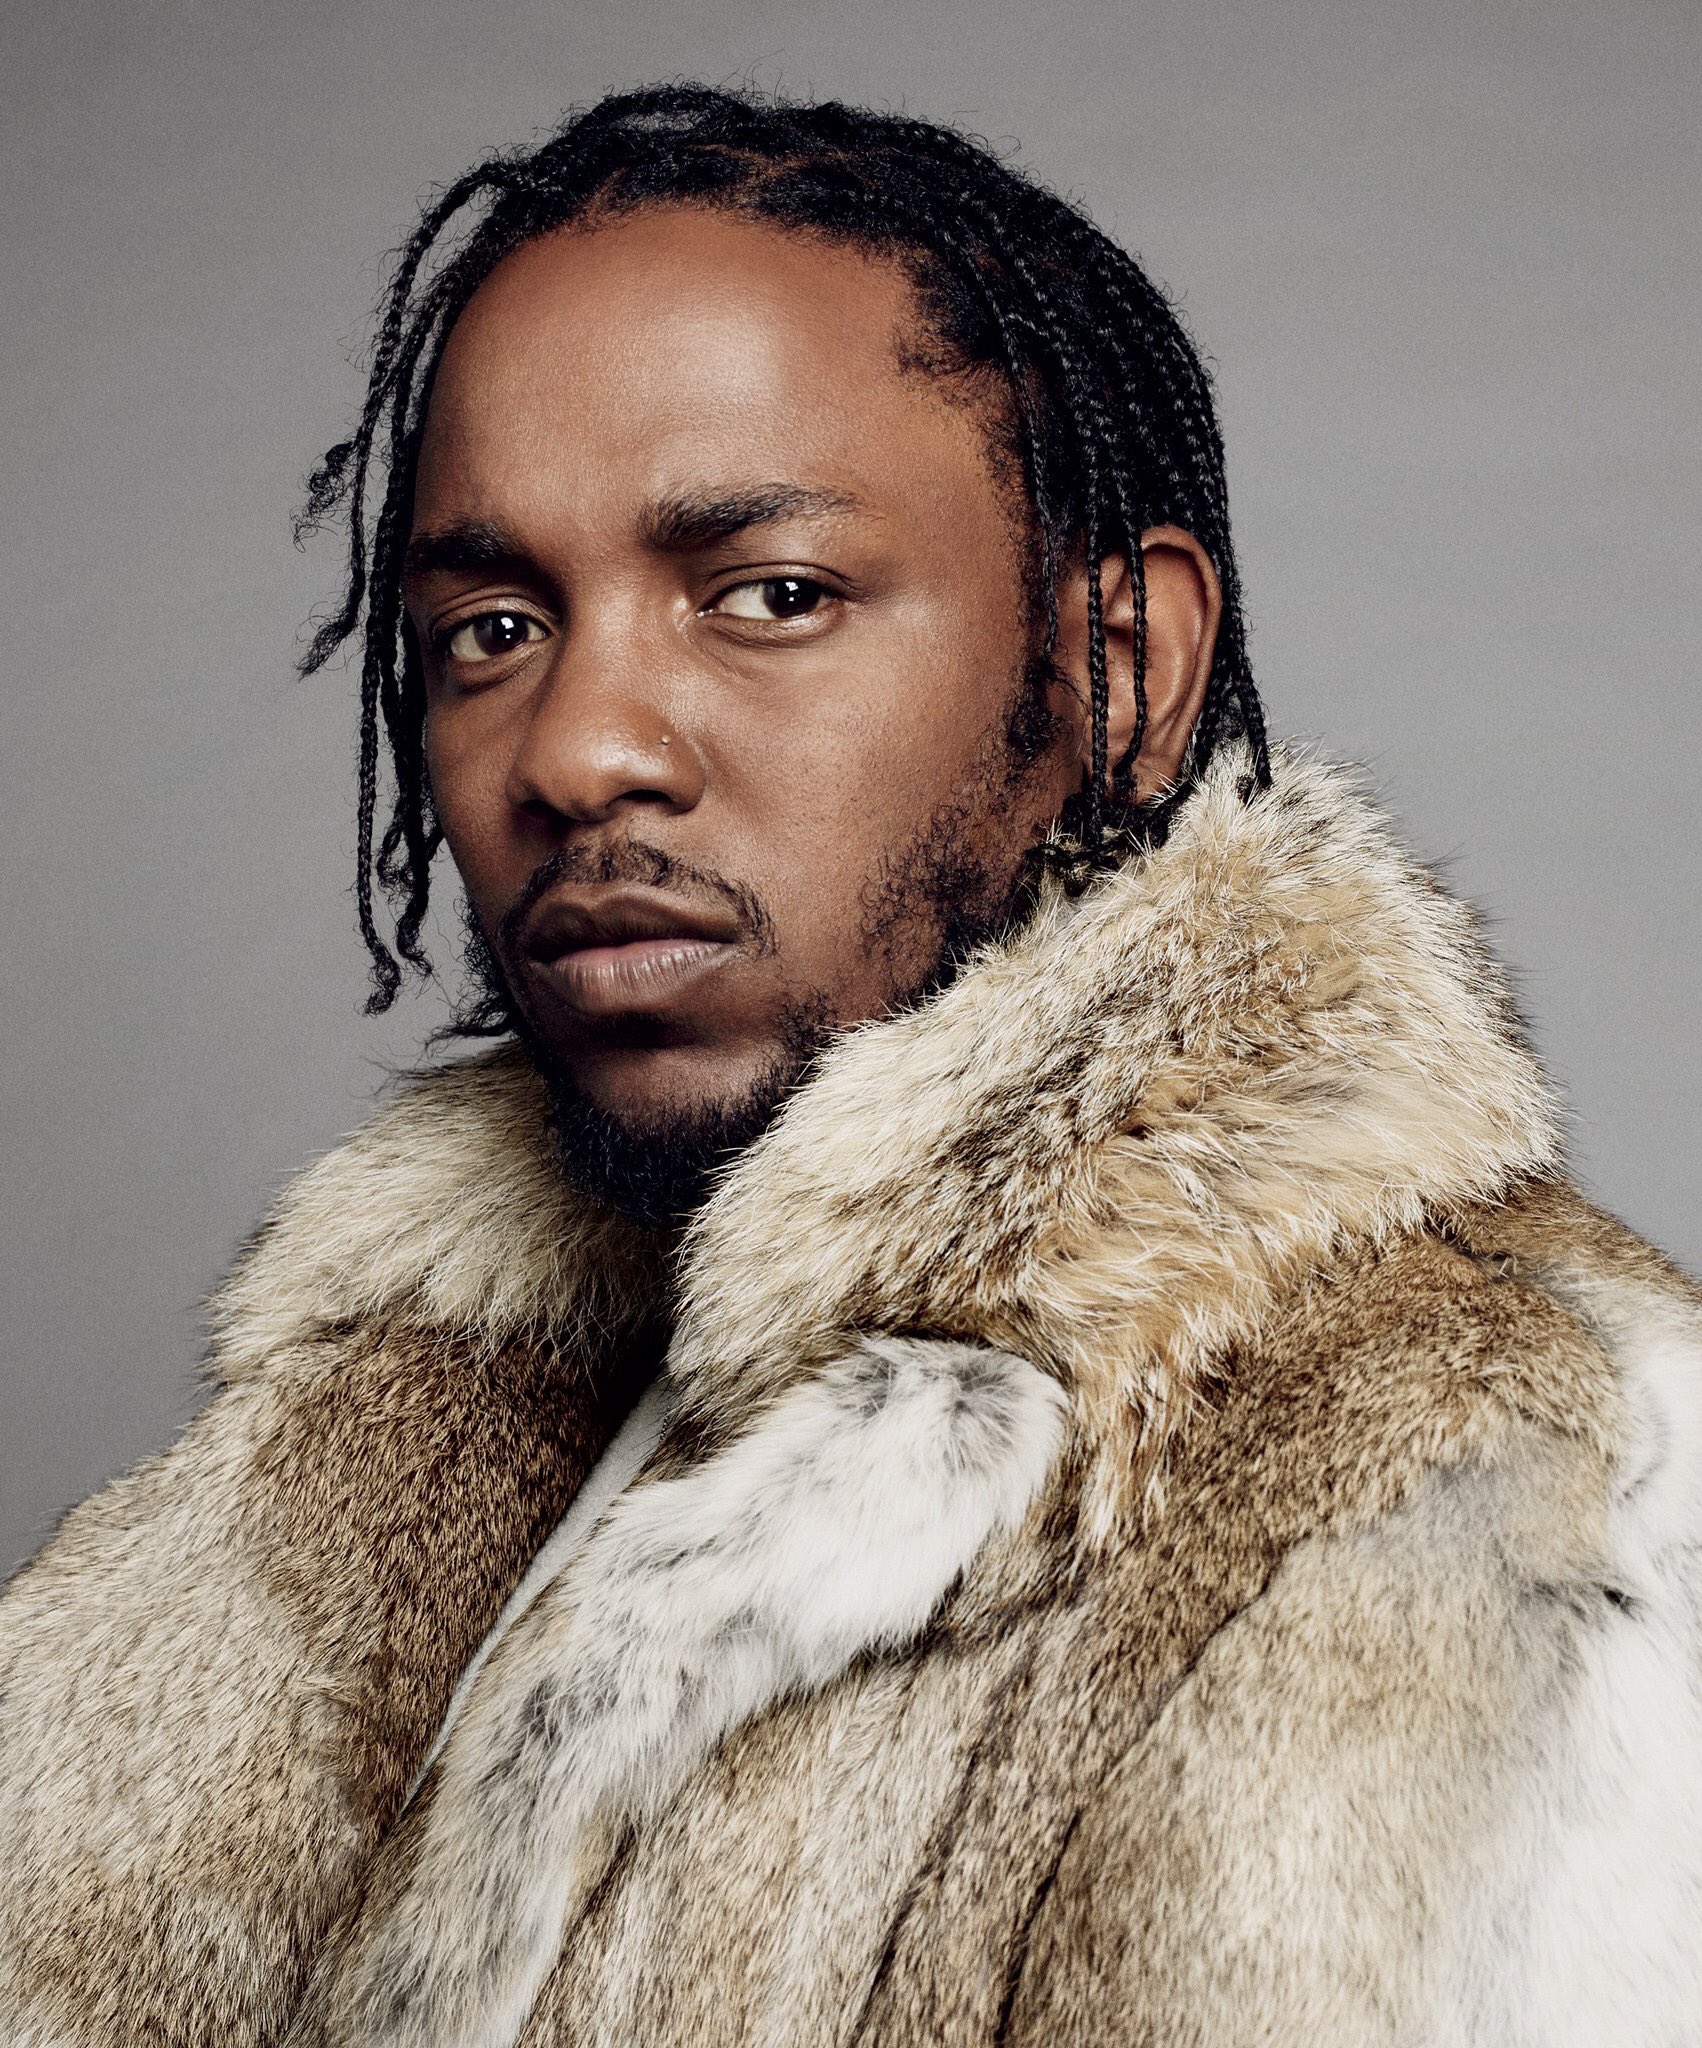 Happy birthday to one of the greatest rappers alive a living legend Kendrick Lamar 